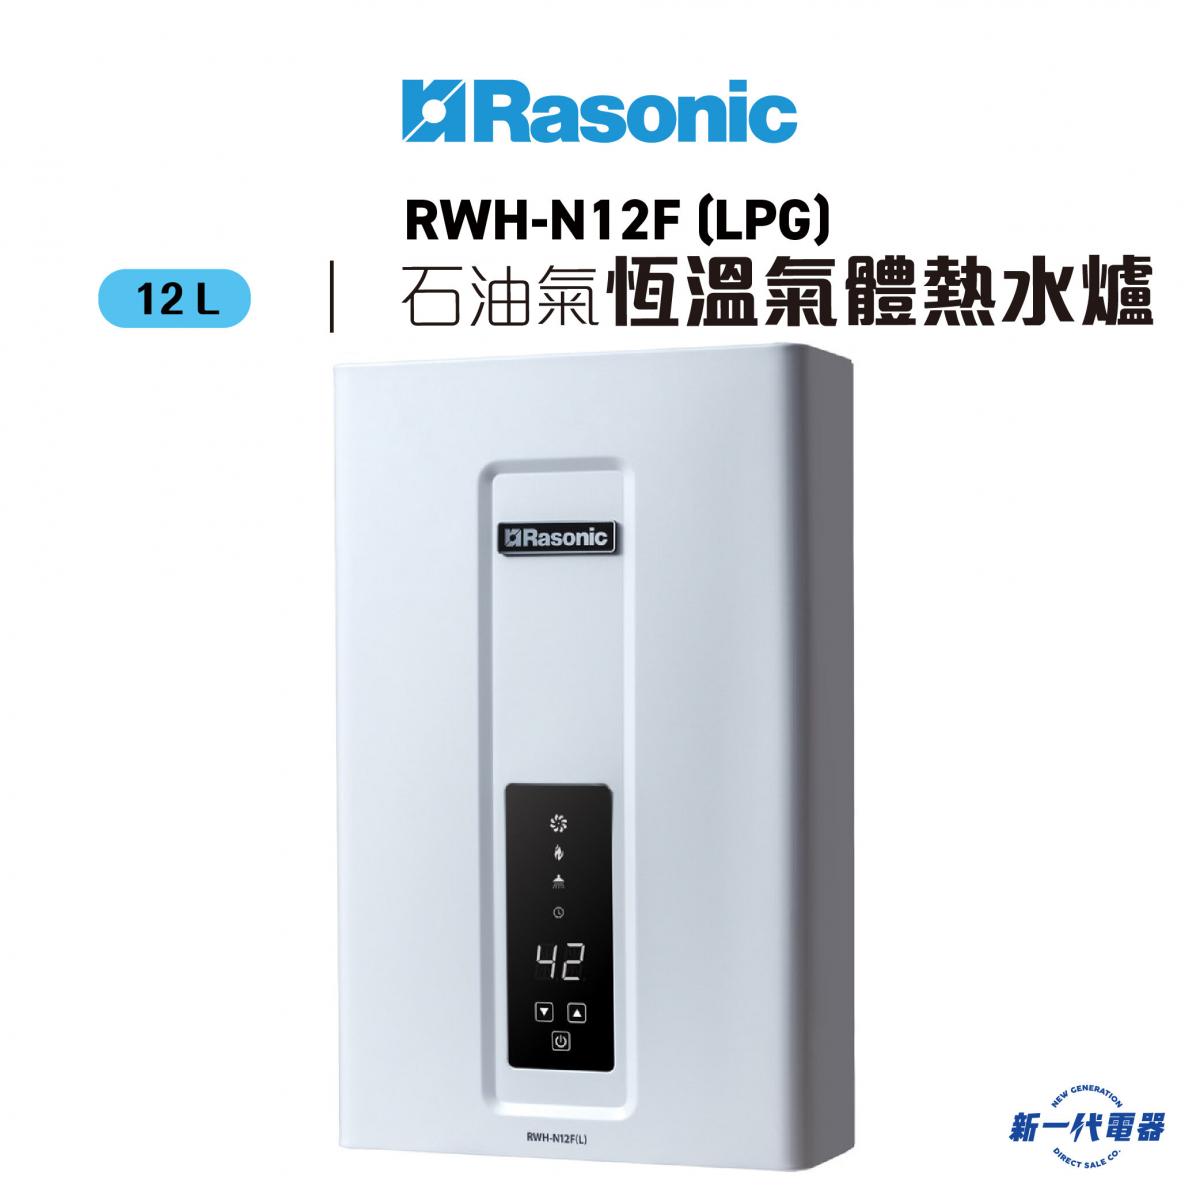 RWHN12F (LPG)(WHITE)  Instantaneous Gas Water Heater (RWH-N12F)